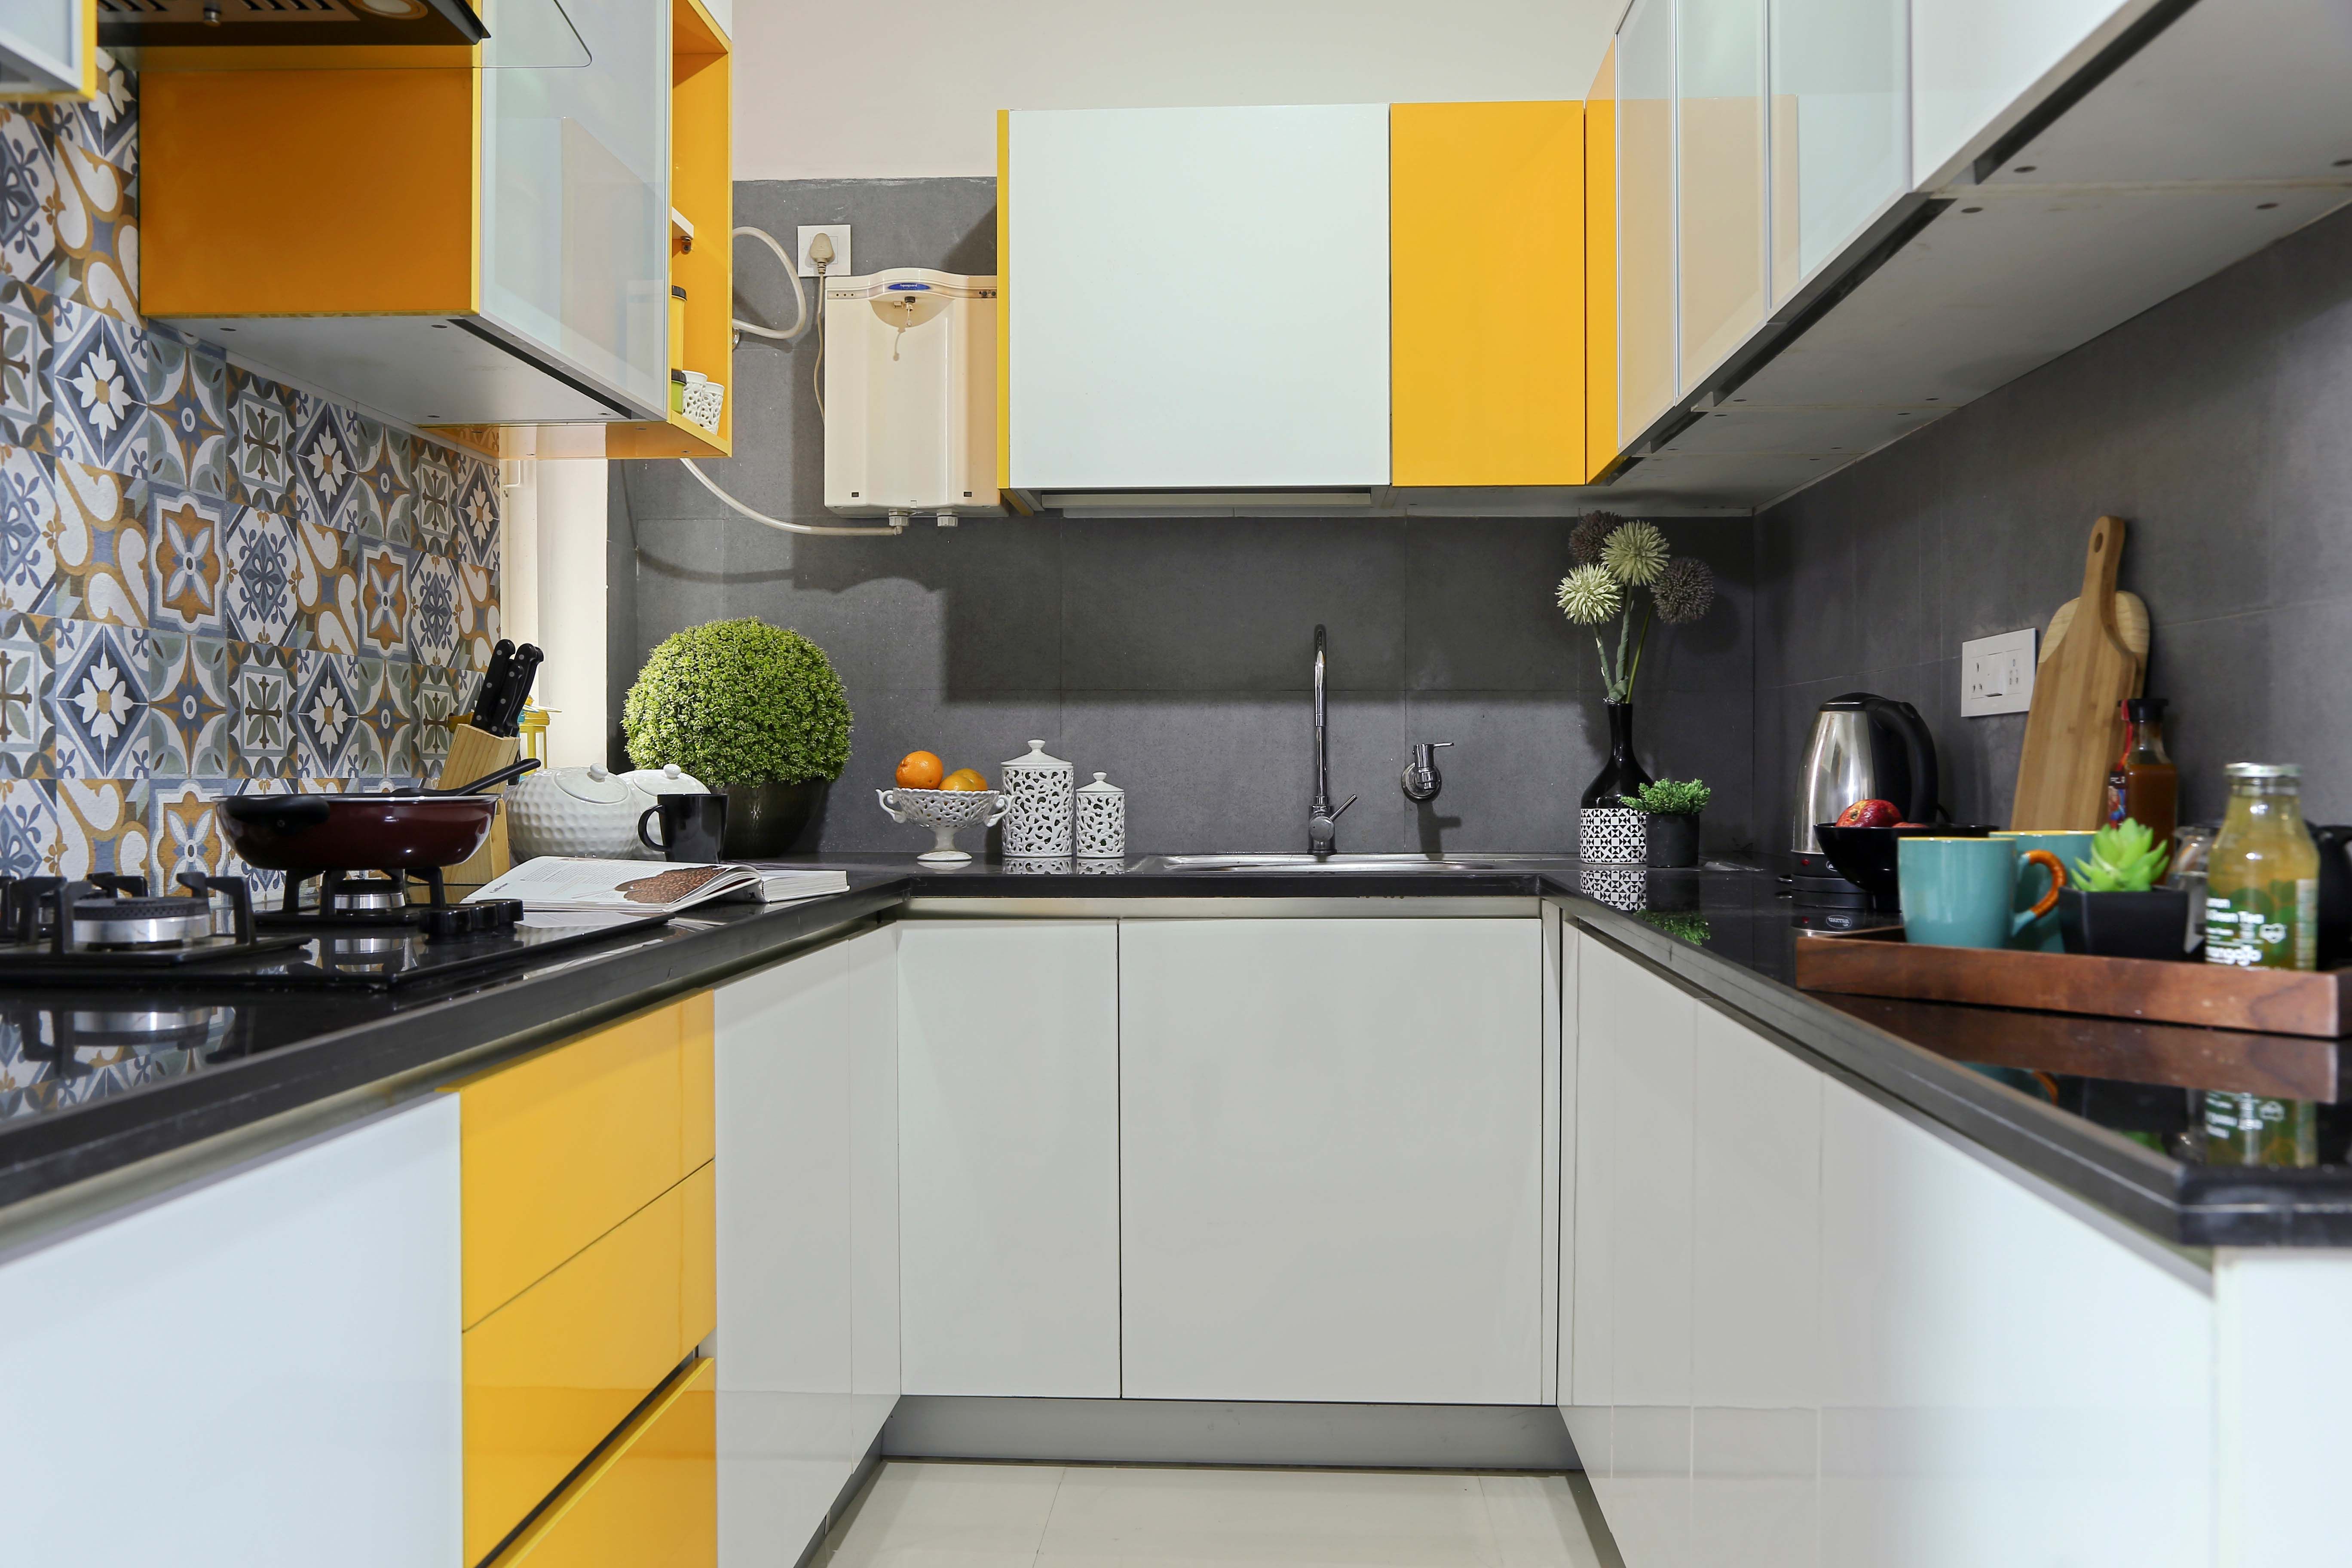 Modern U-Shaped Modular Kitchen Design with Frosty White and Marigold Accents